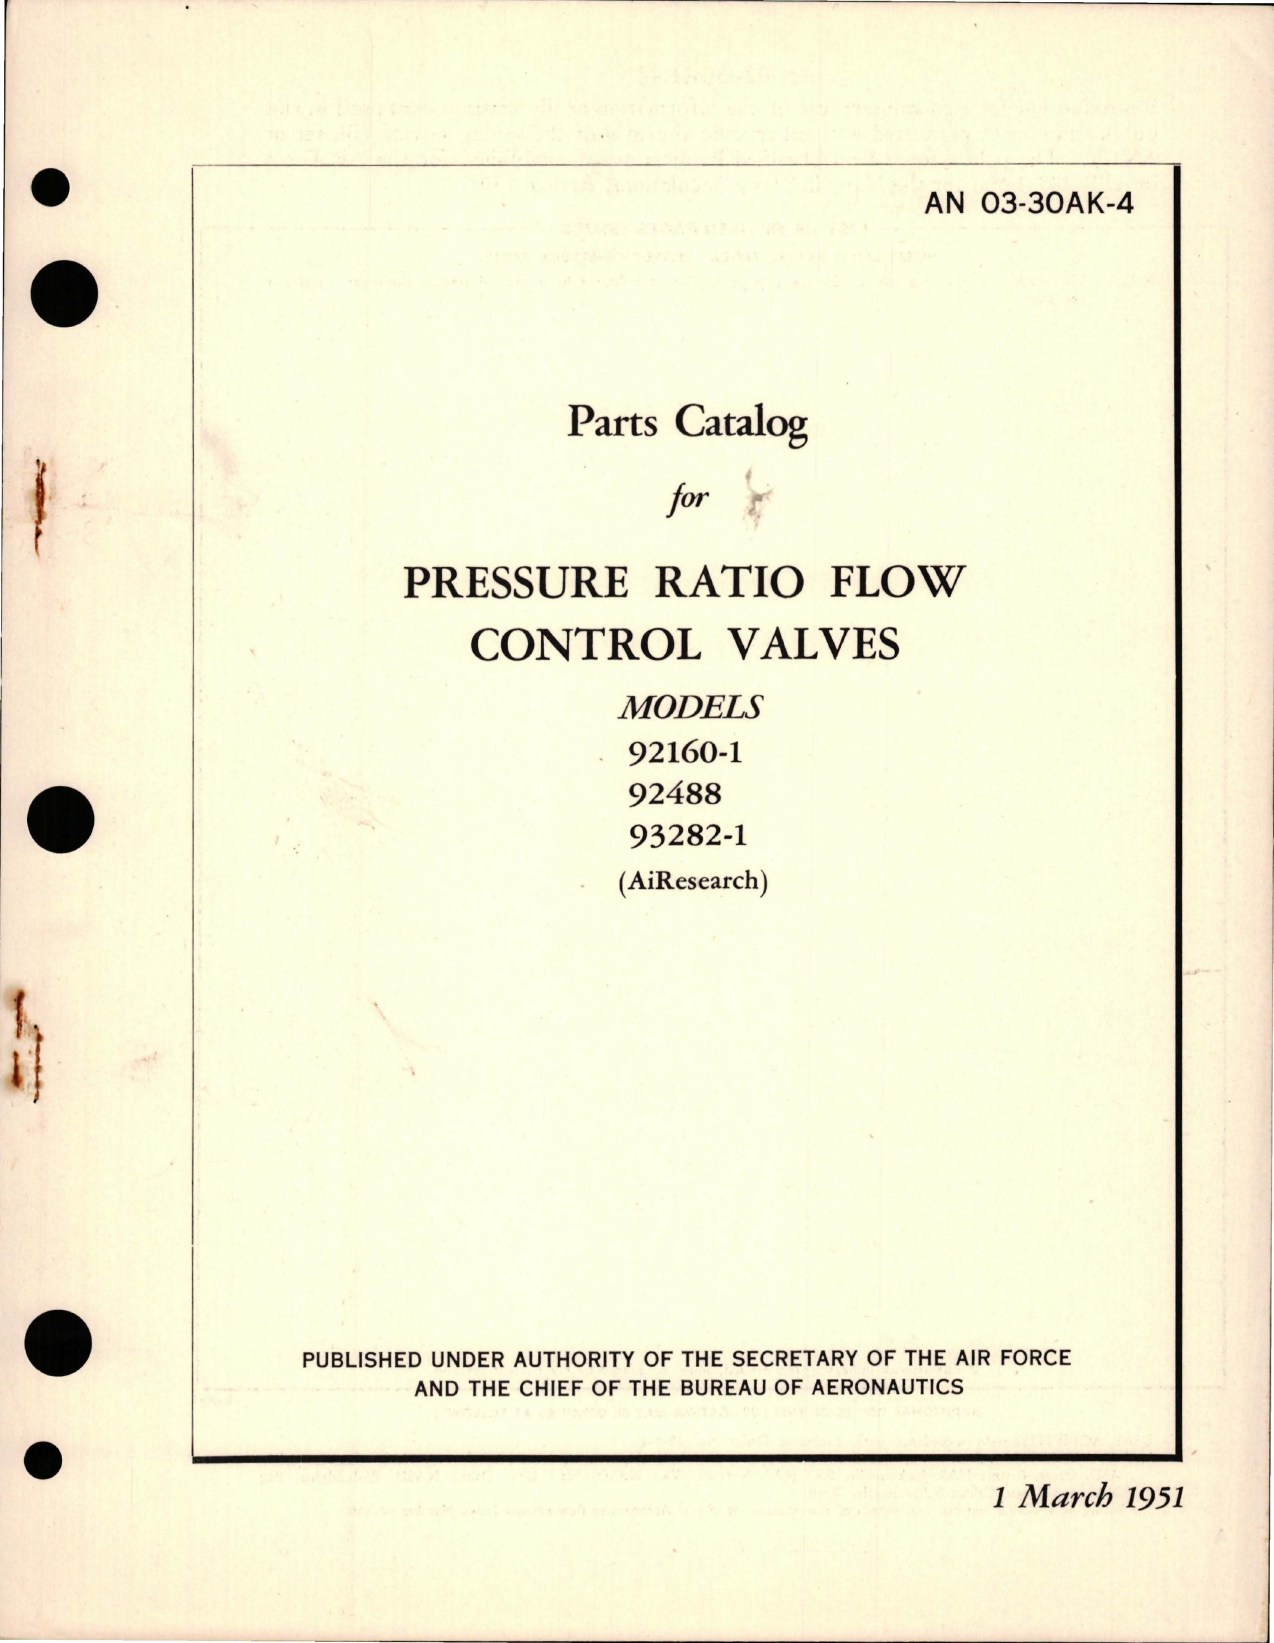 Sample page 1 from AirCorps Library document: Parts Catalog for Pressure Ratio Flow Control Valves - Models 92160-1, 92488, and 93282-1